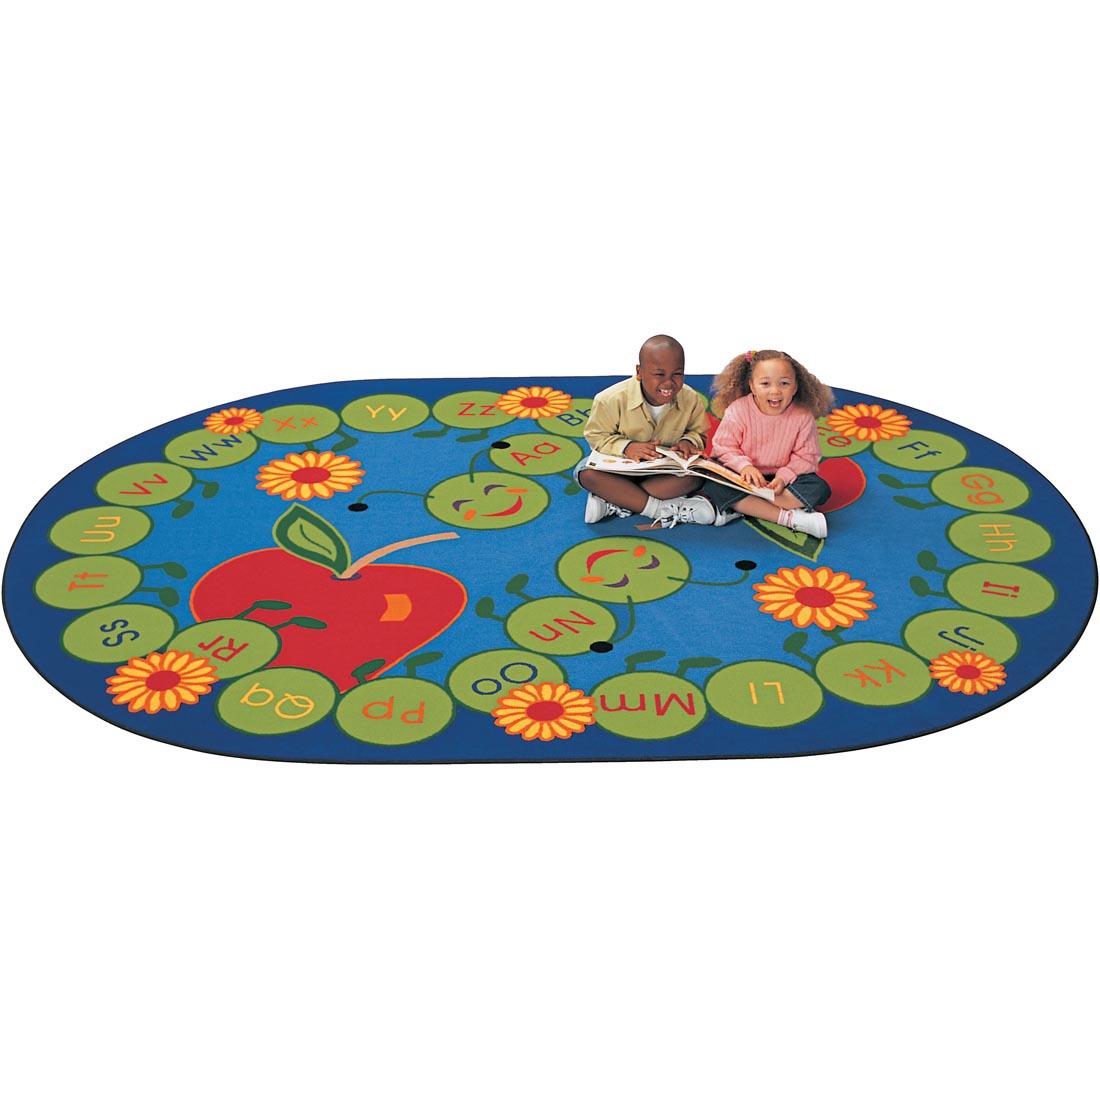 Children sitting with a book on the ABC Caterpillar Oval Rug by Carpets For Kids